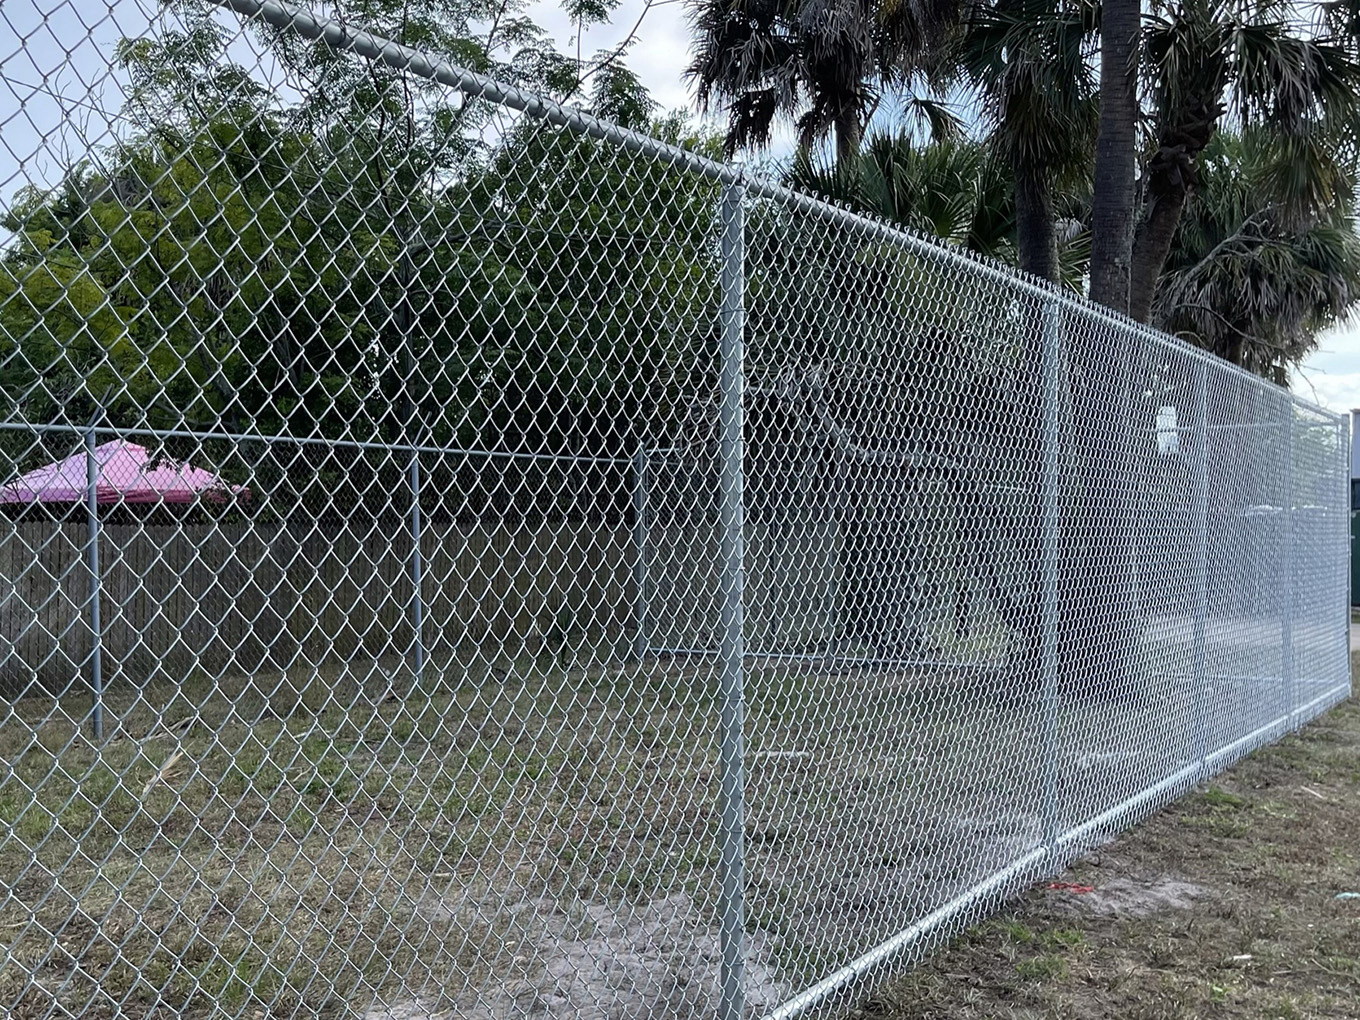 Photo of a Florida chain link fence